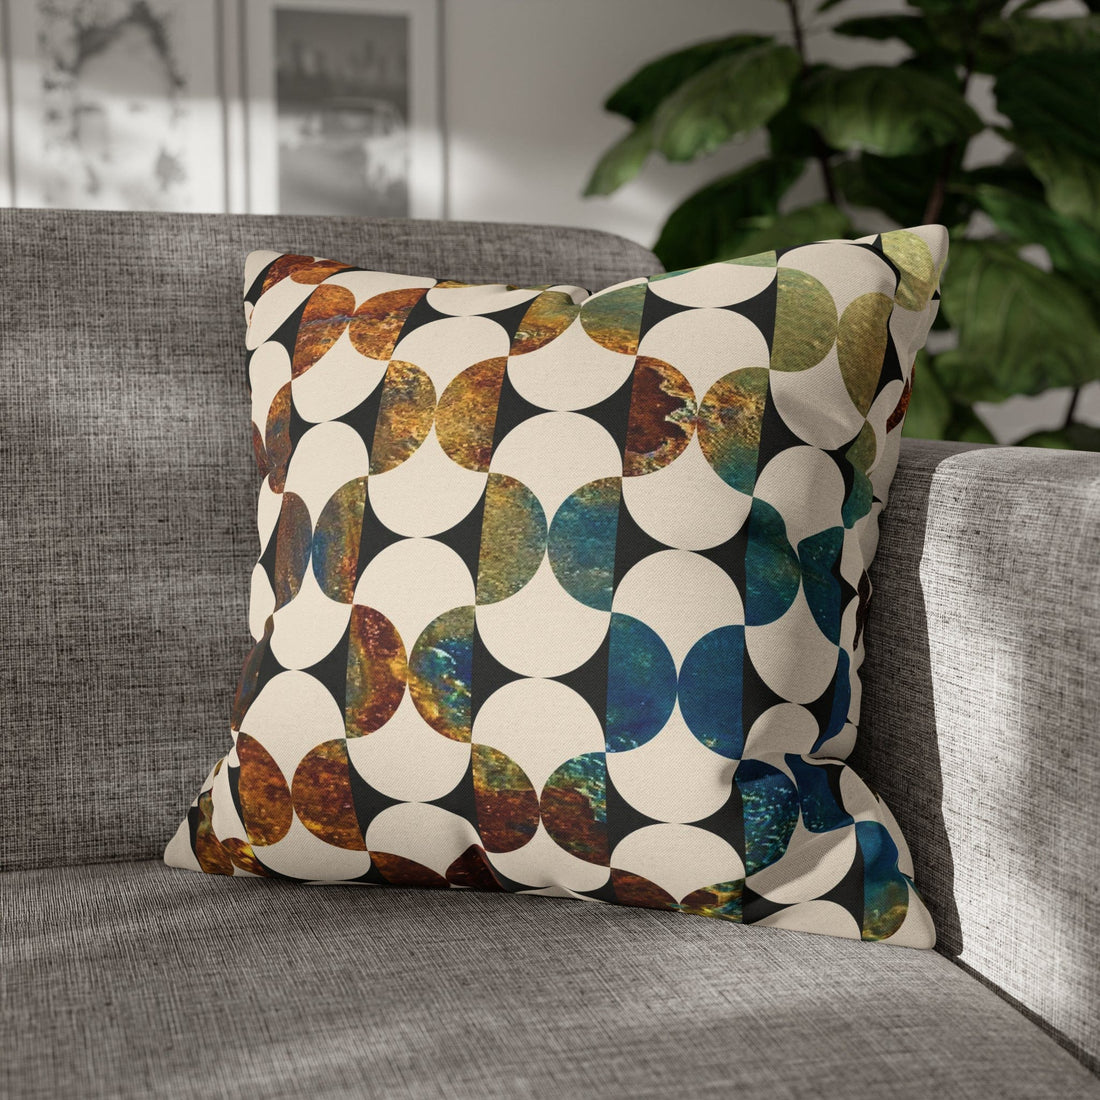 Kate McEnroe New York Mid Century Modern Geometric Abstract Throw Pillow Covers, Brown, Blue, Beige, 50s Retro Living Room, Bedroom Cushion Covers Throw Pillow Covers 20&quot; × 20&quot; 15602827663404342493